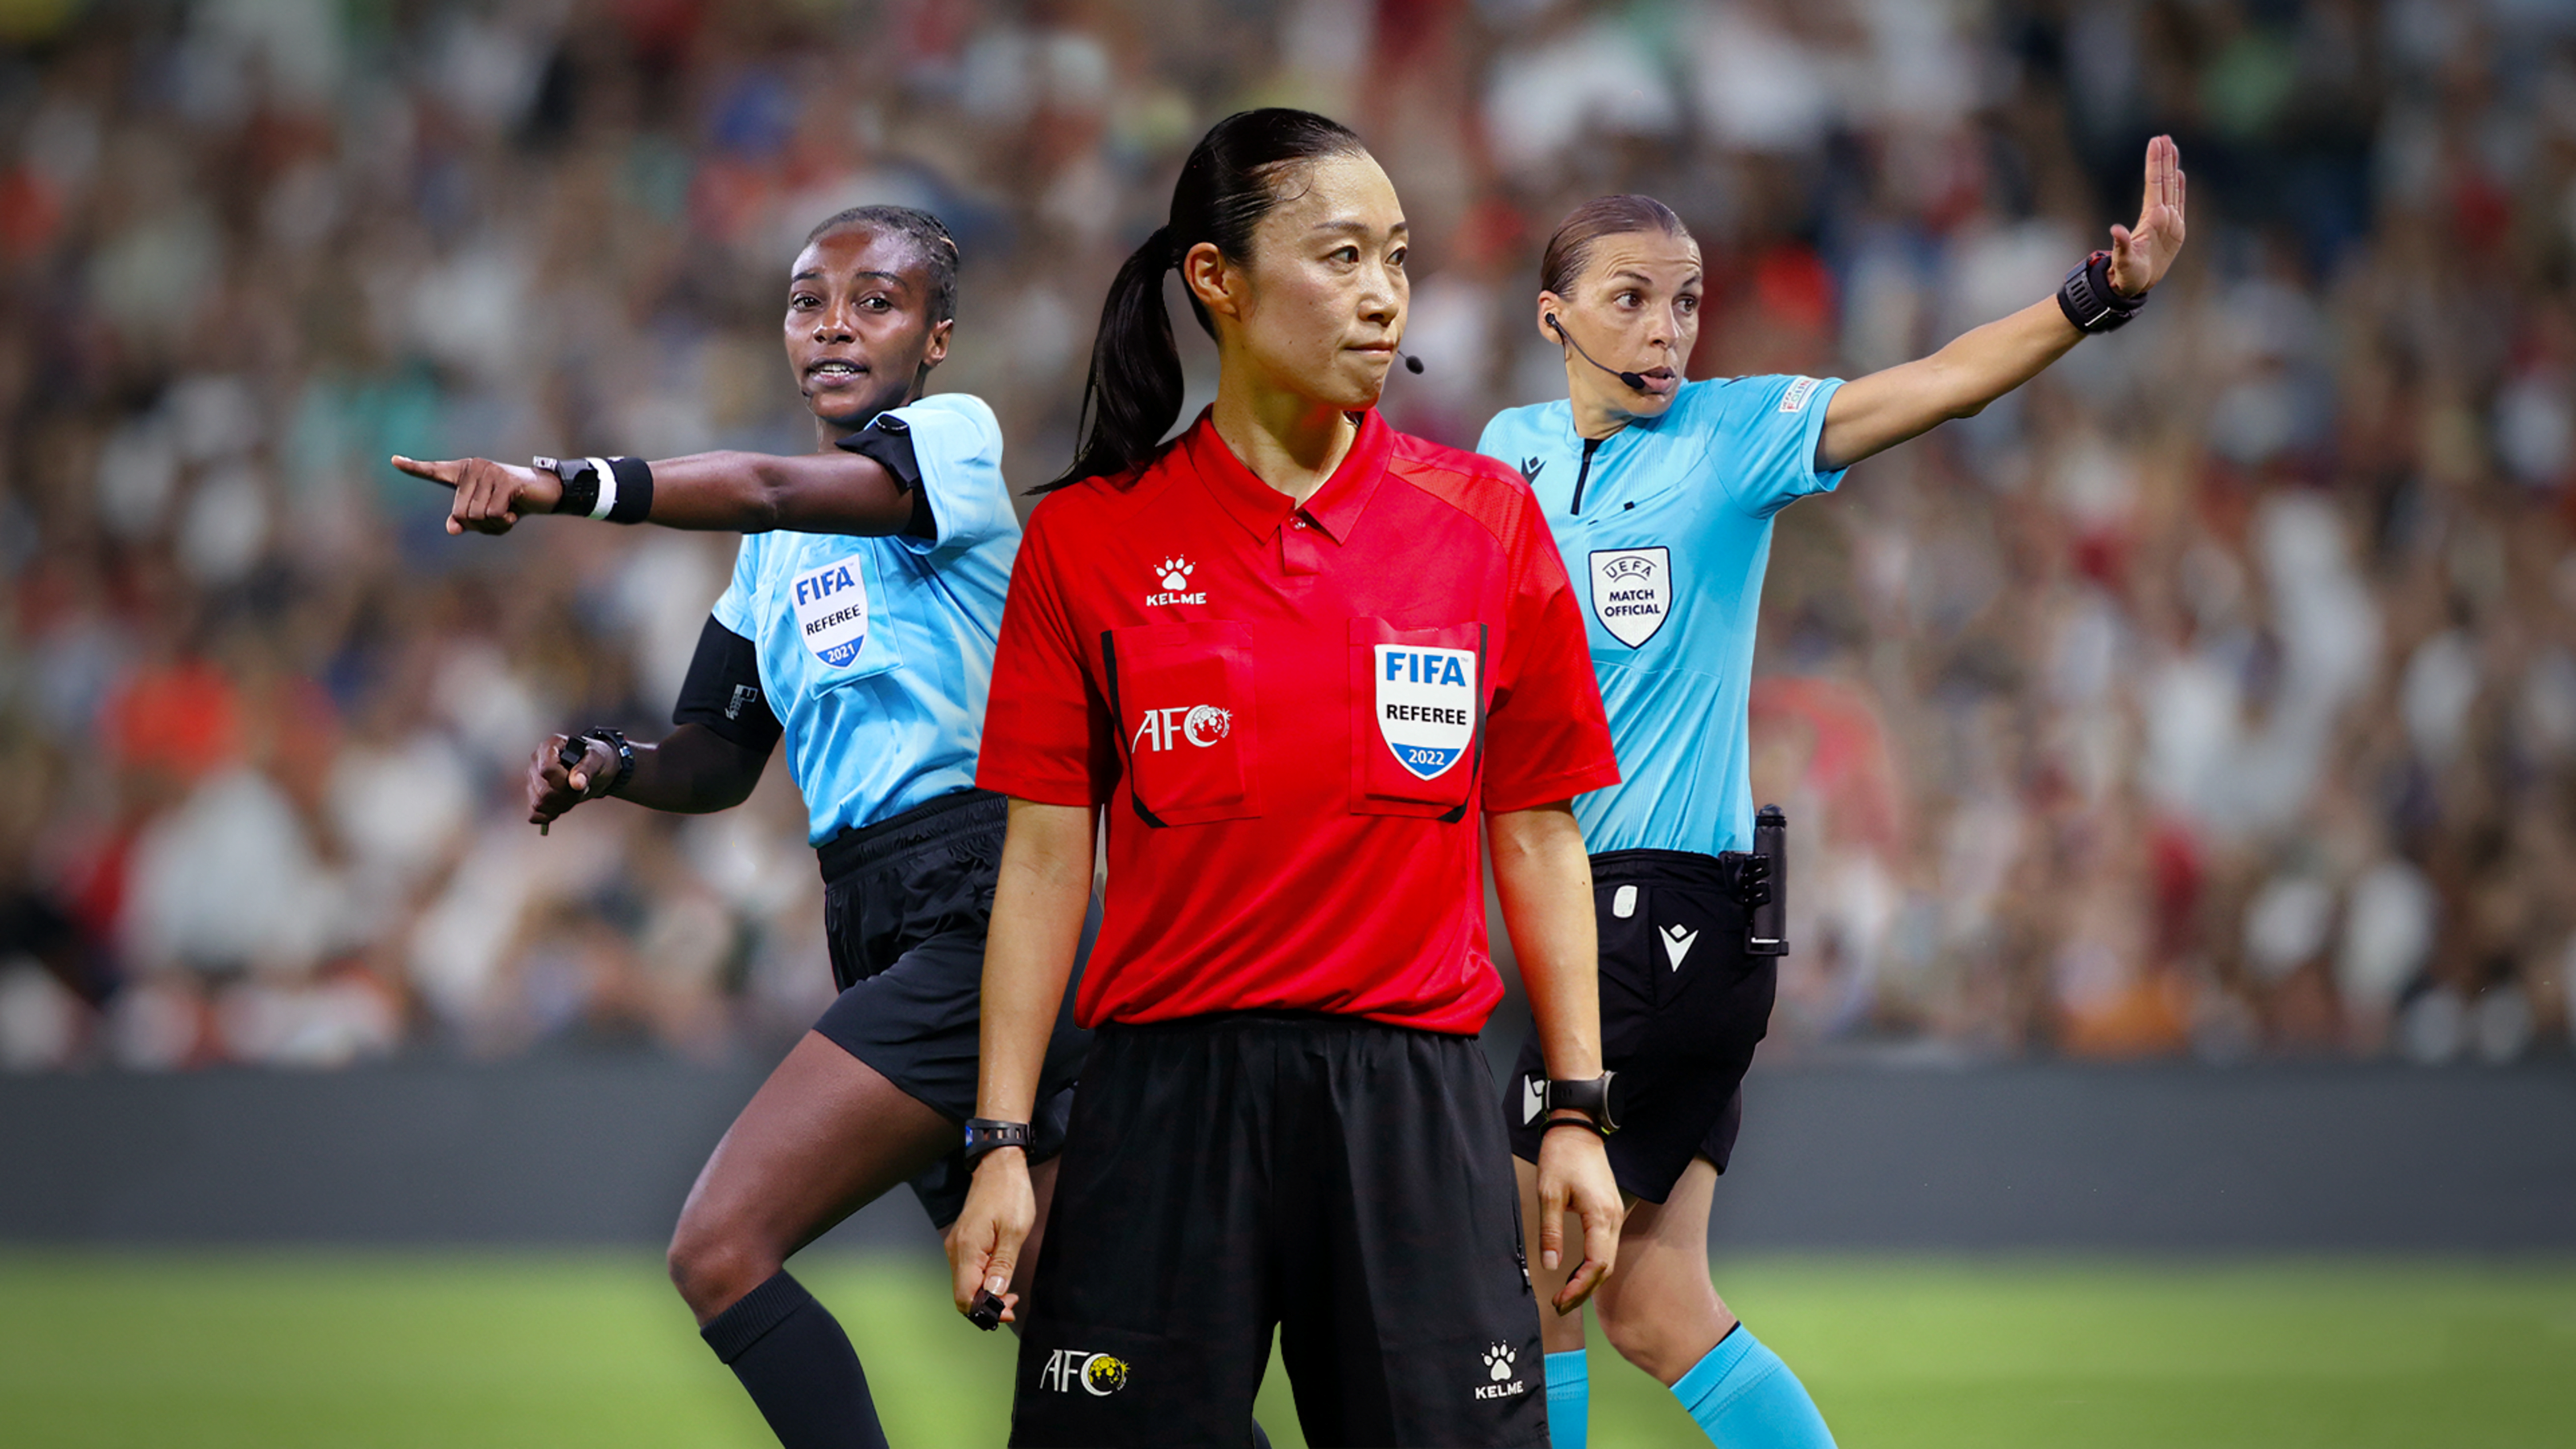 New norm? Women referees join world cup tournament